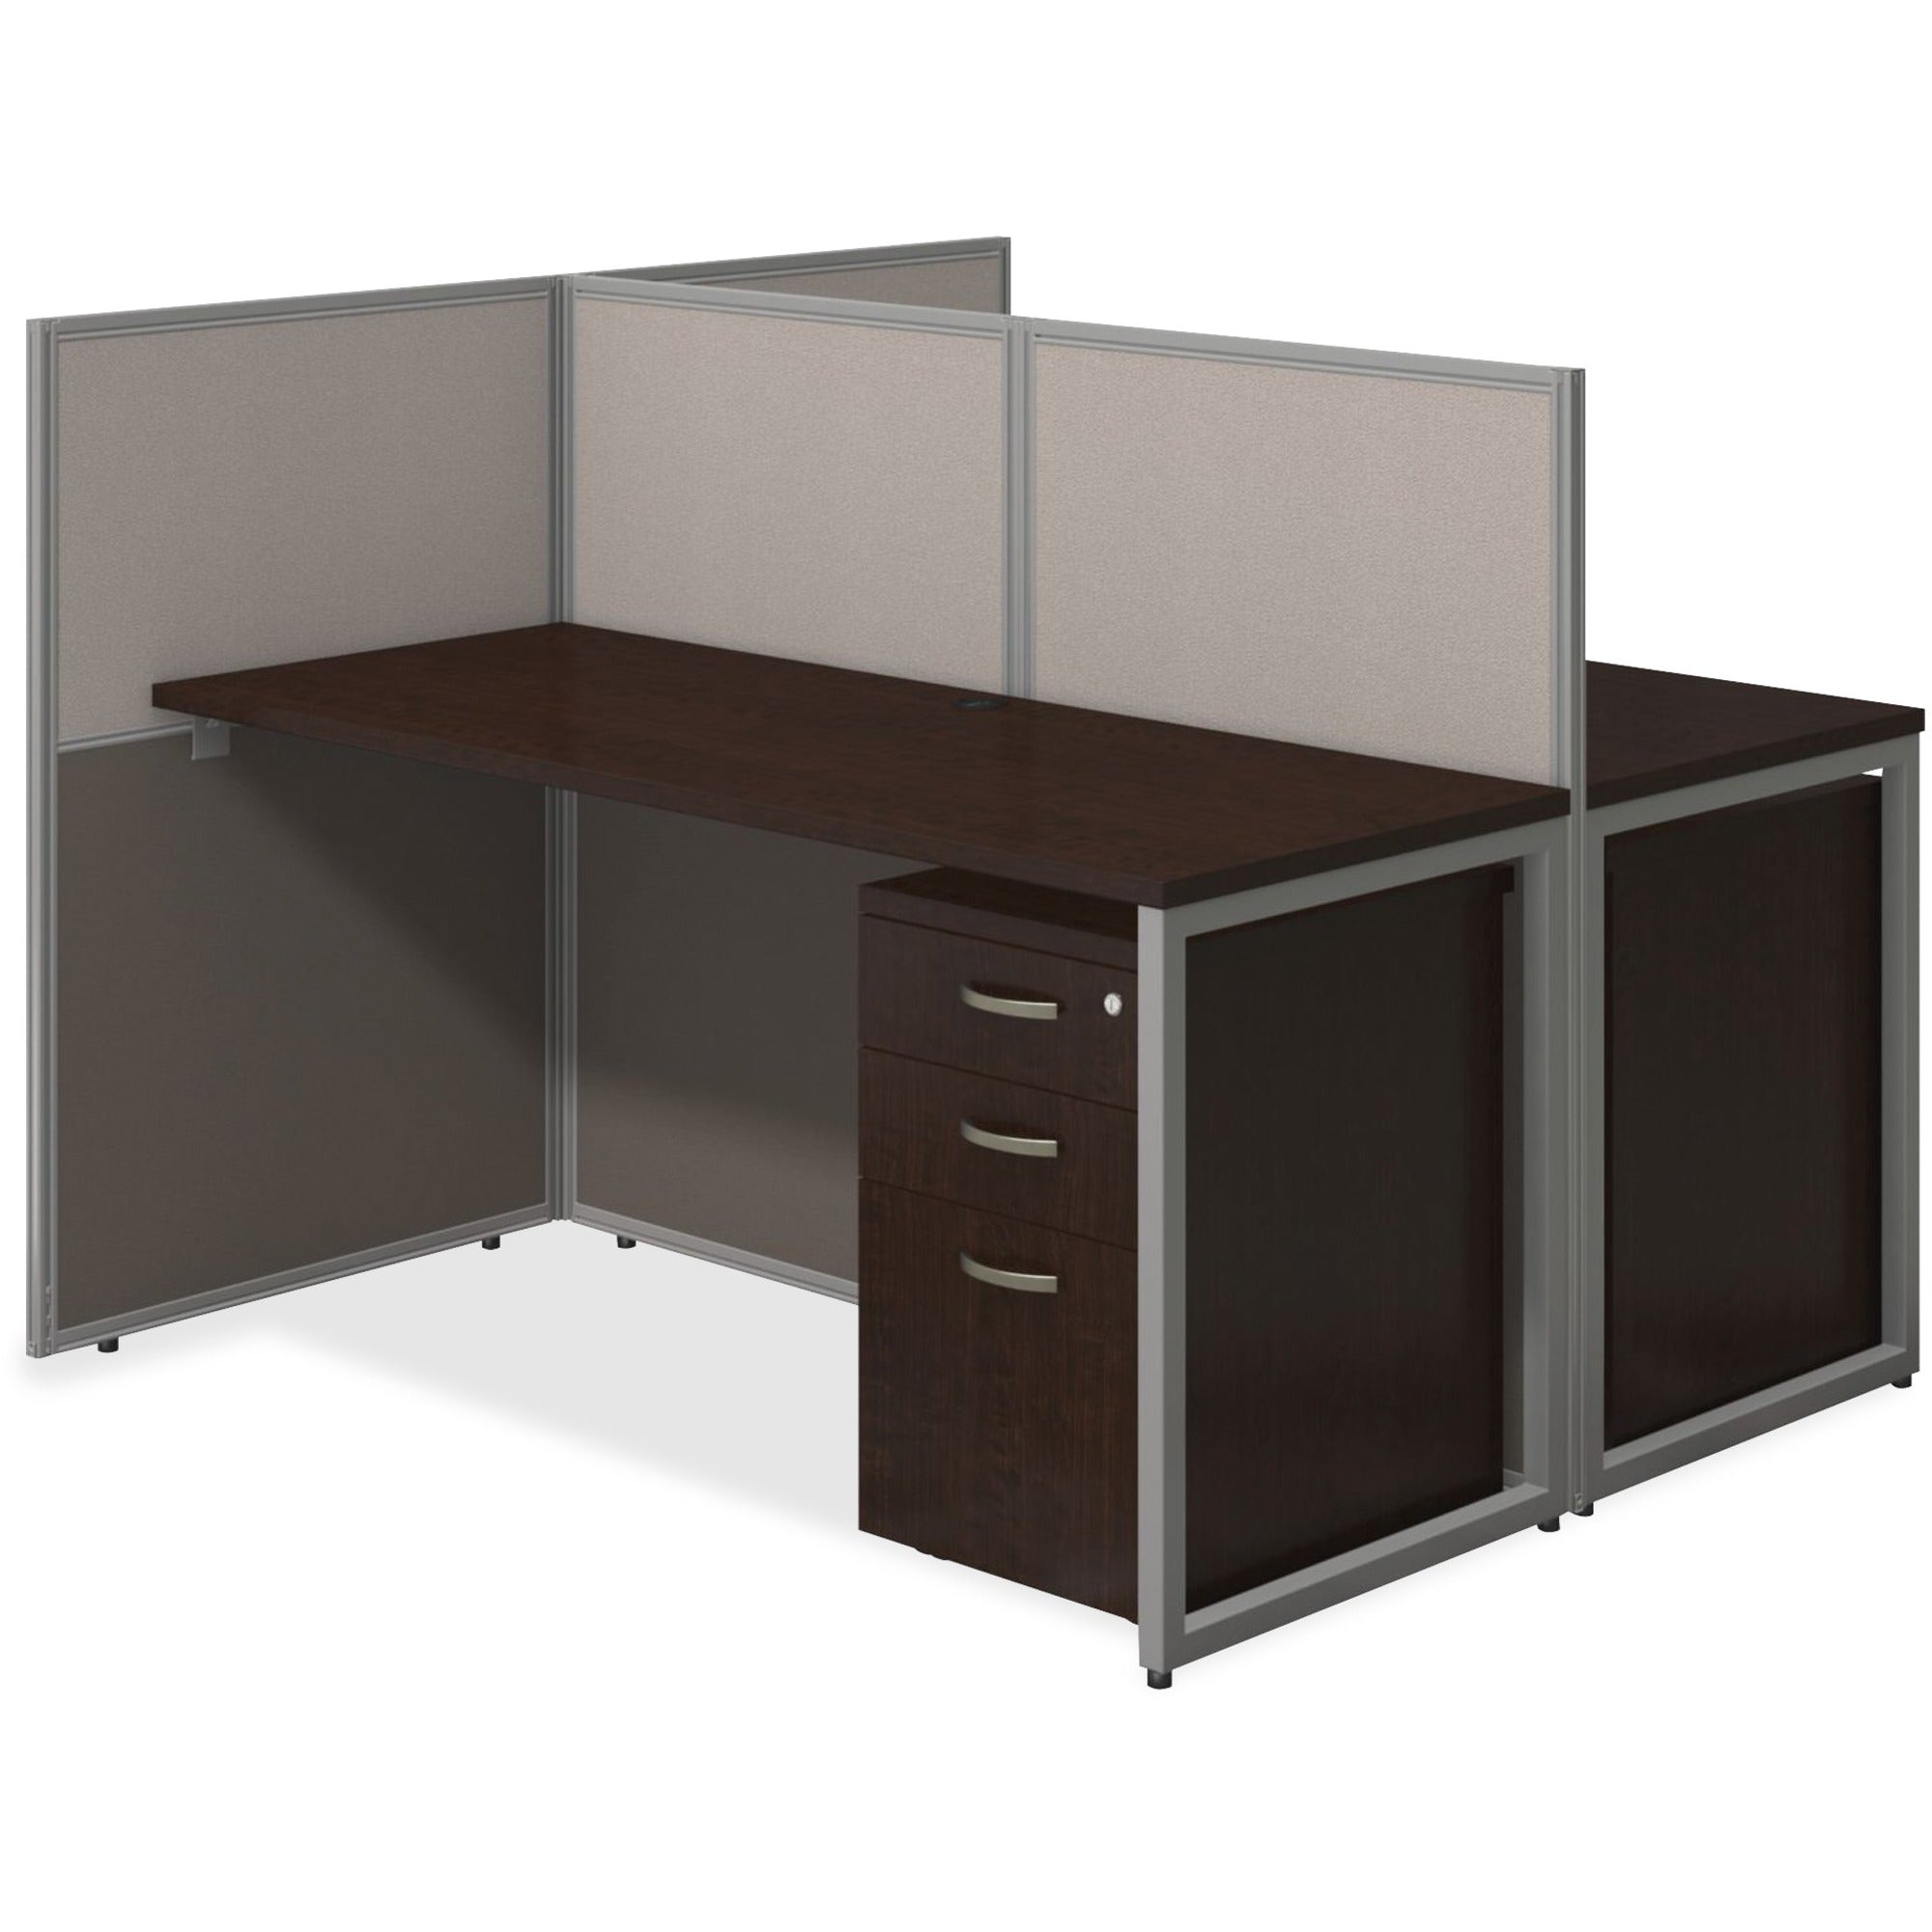 Bush Business Furniture Easy Office: 60W 2 Person Straight Desk Open Office with 3 Drawer Mobile Pedestals - Mocha Cherry - 1